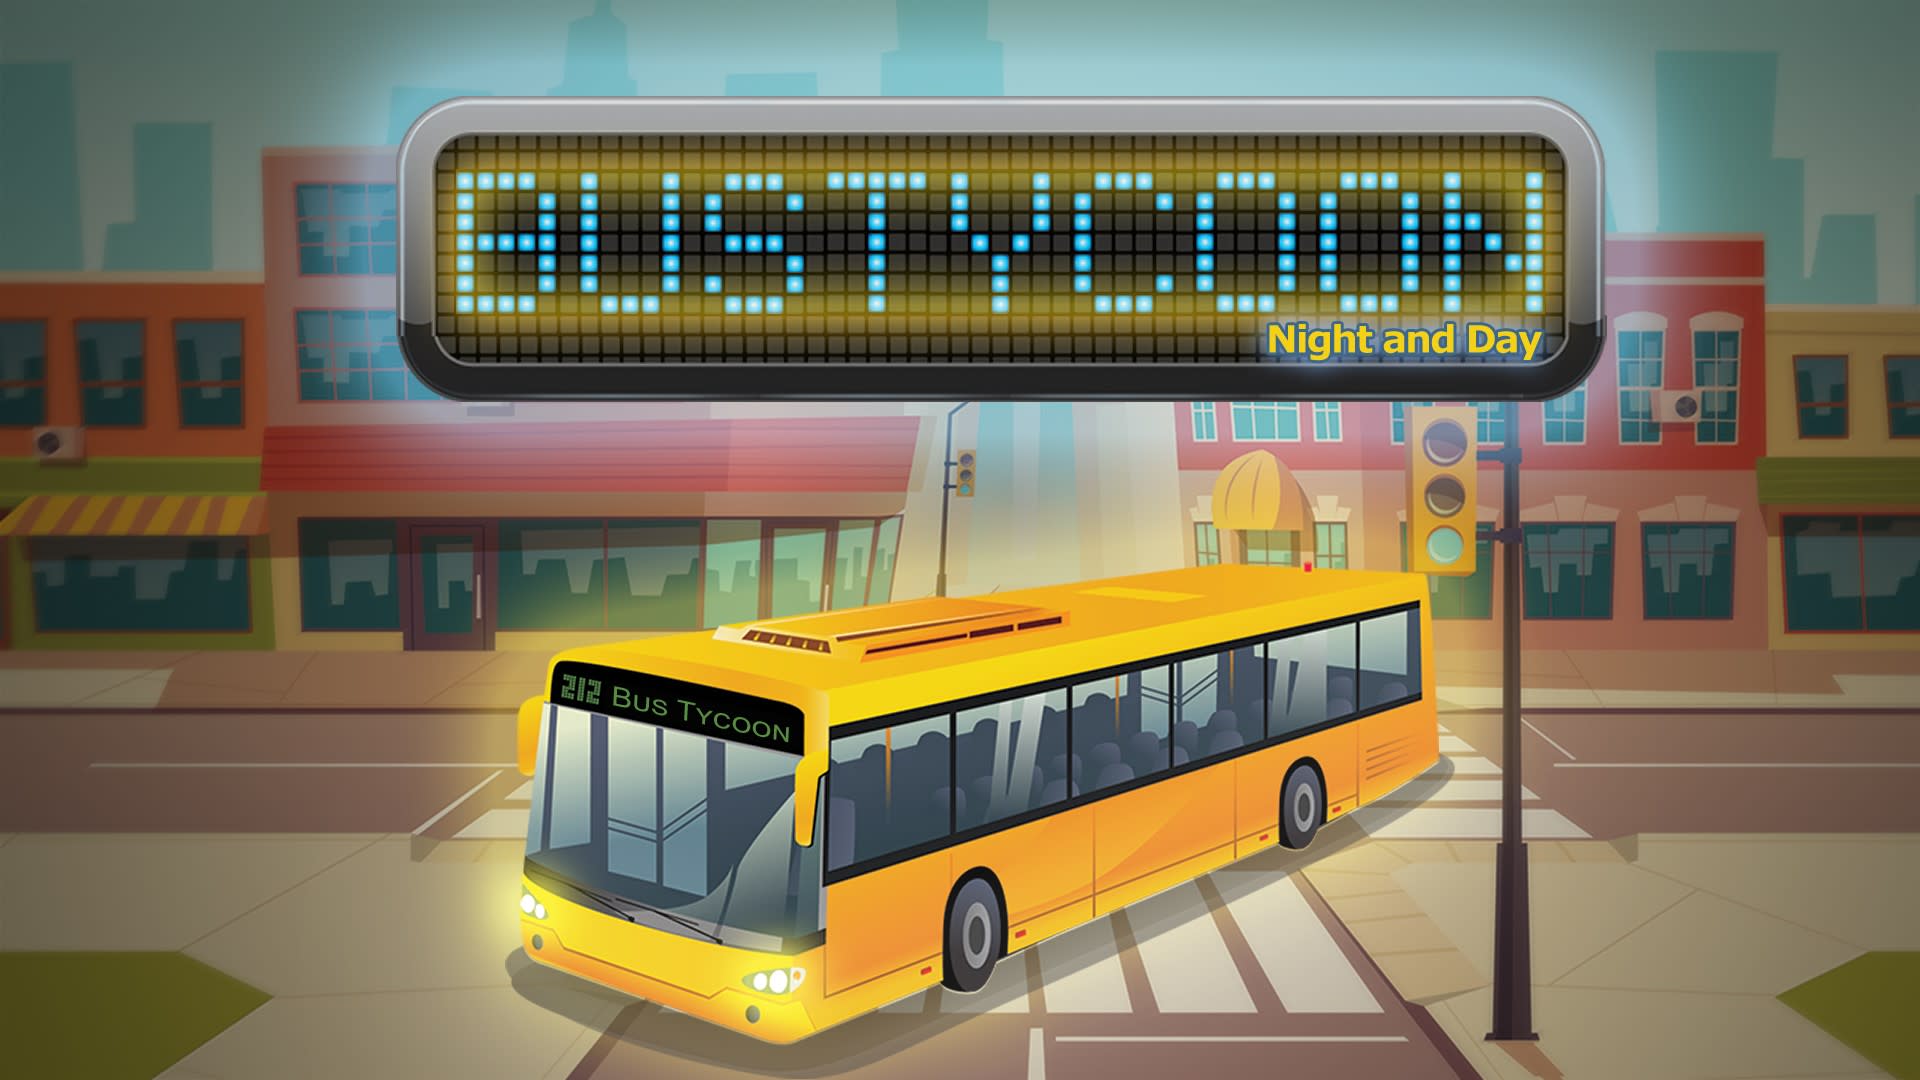 Bus Tycoon Night and Day